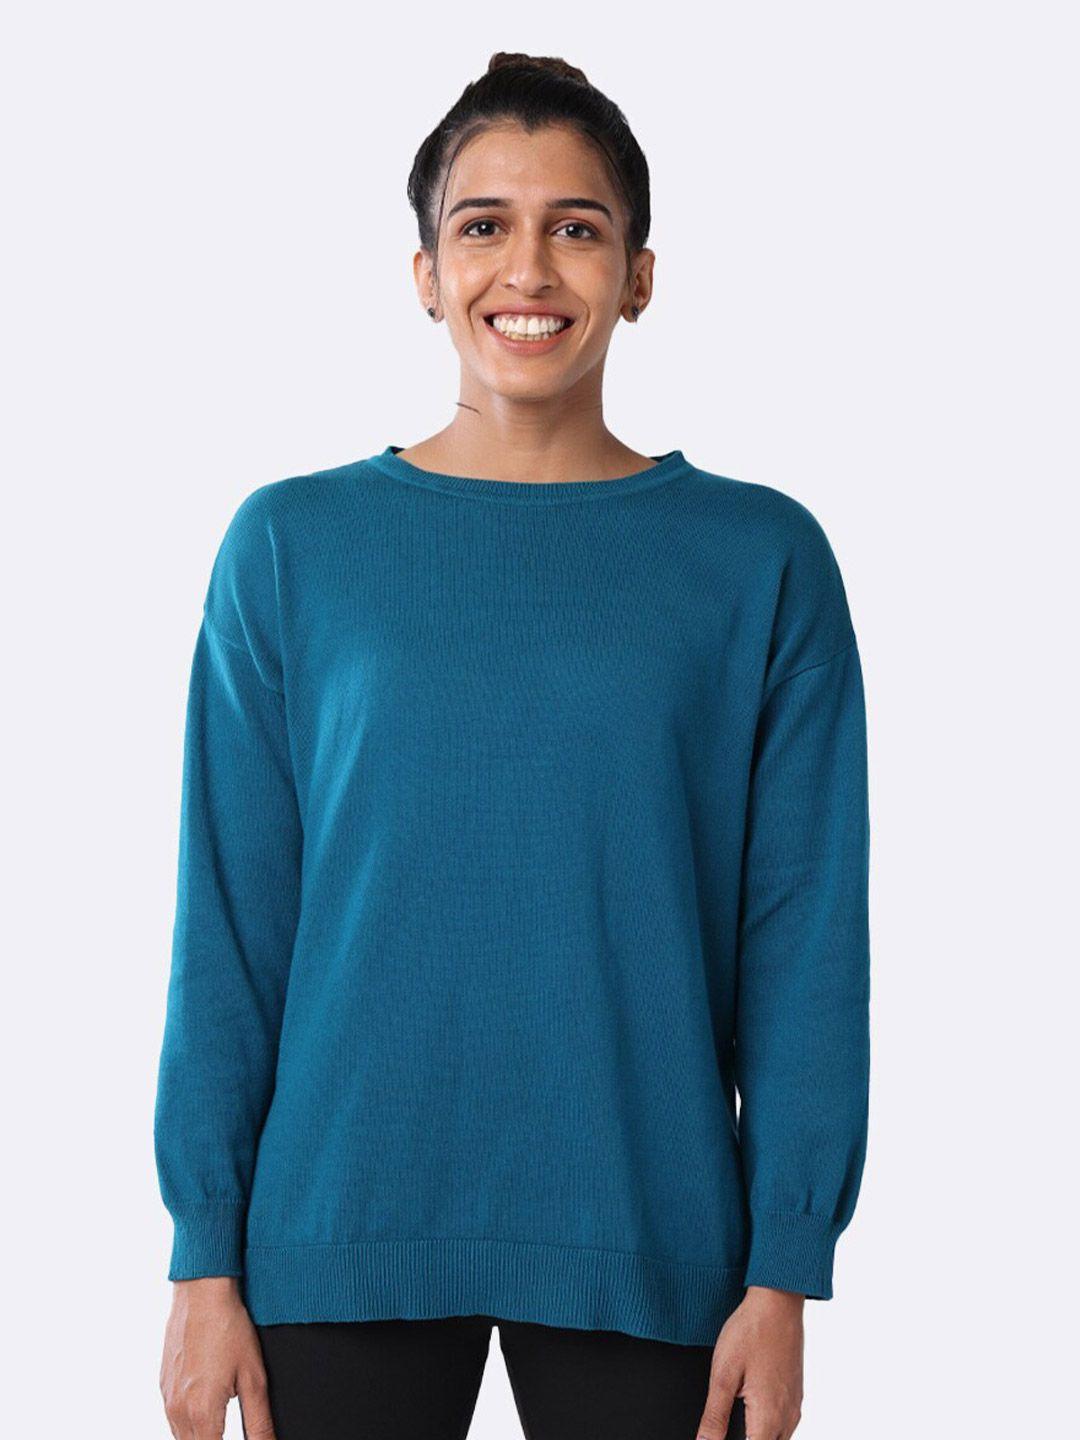 blissclub women teal at ease cotton knit full sleeve t-shirt